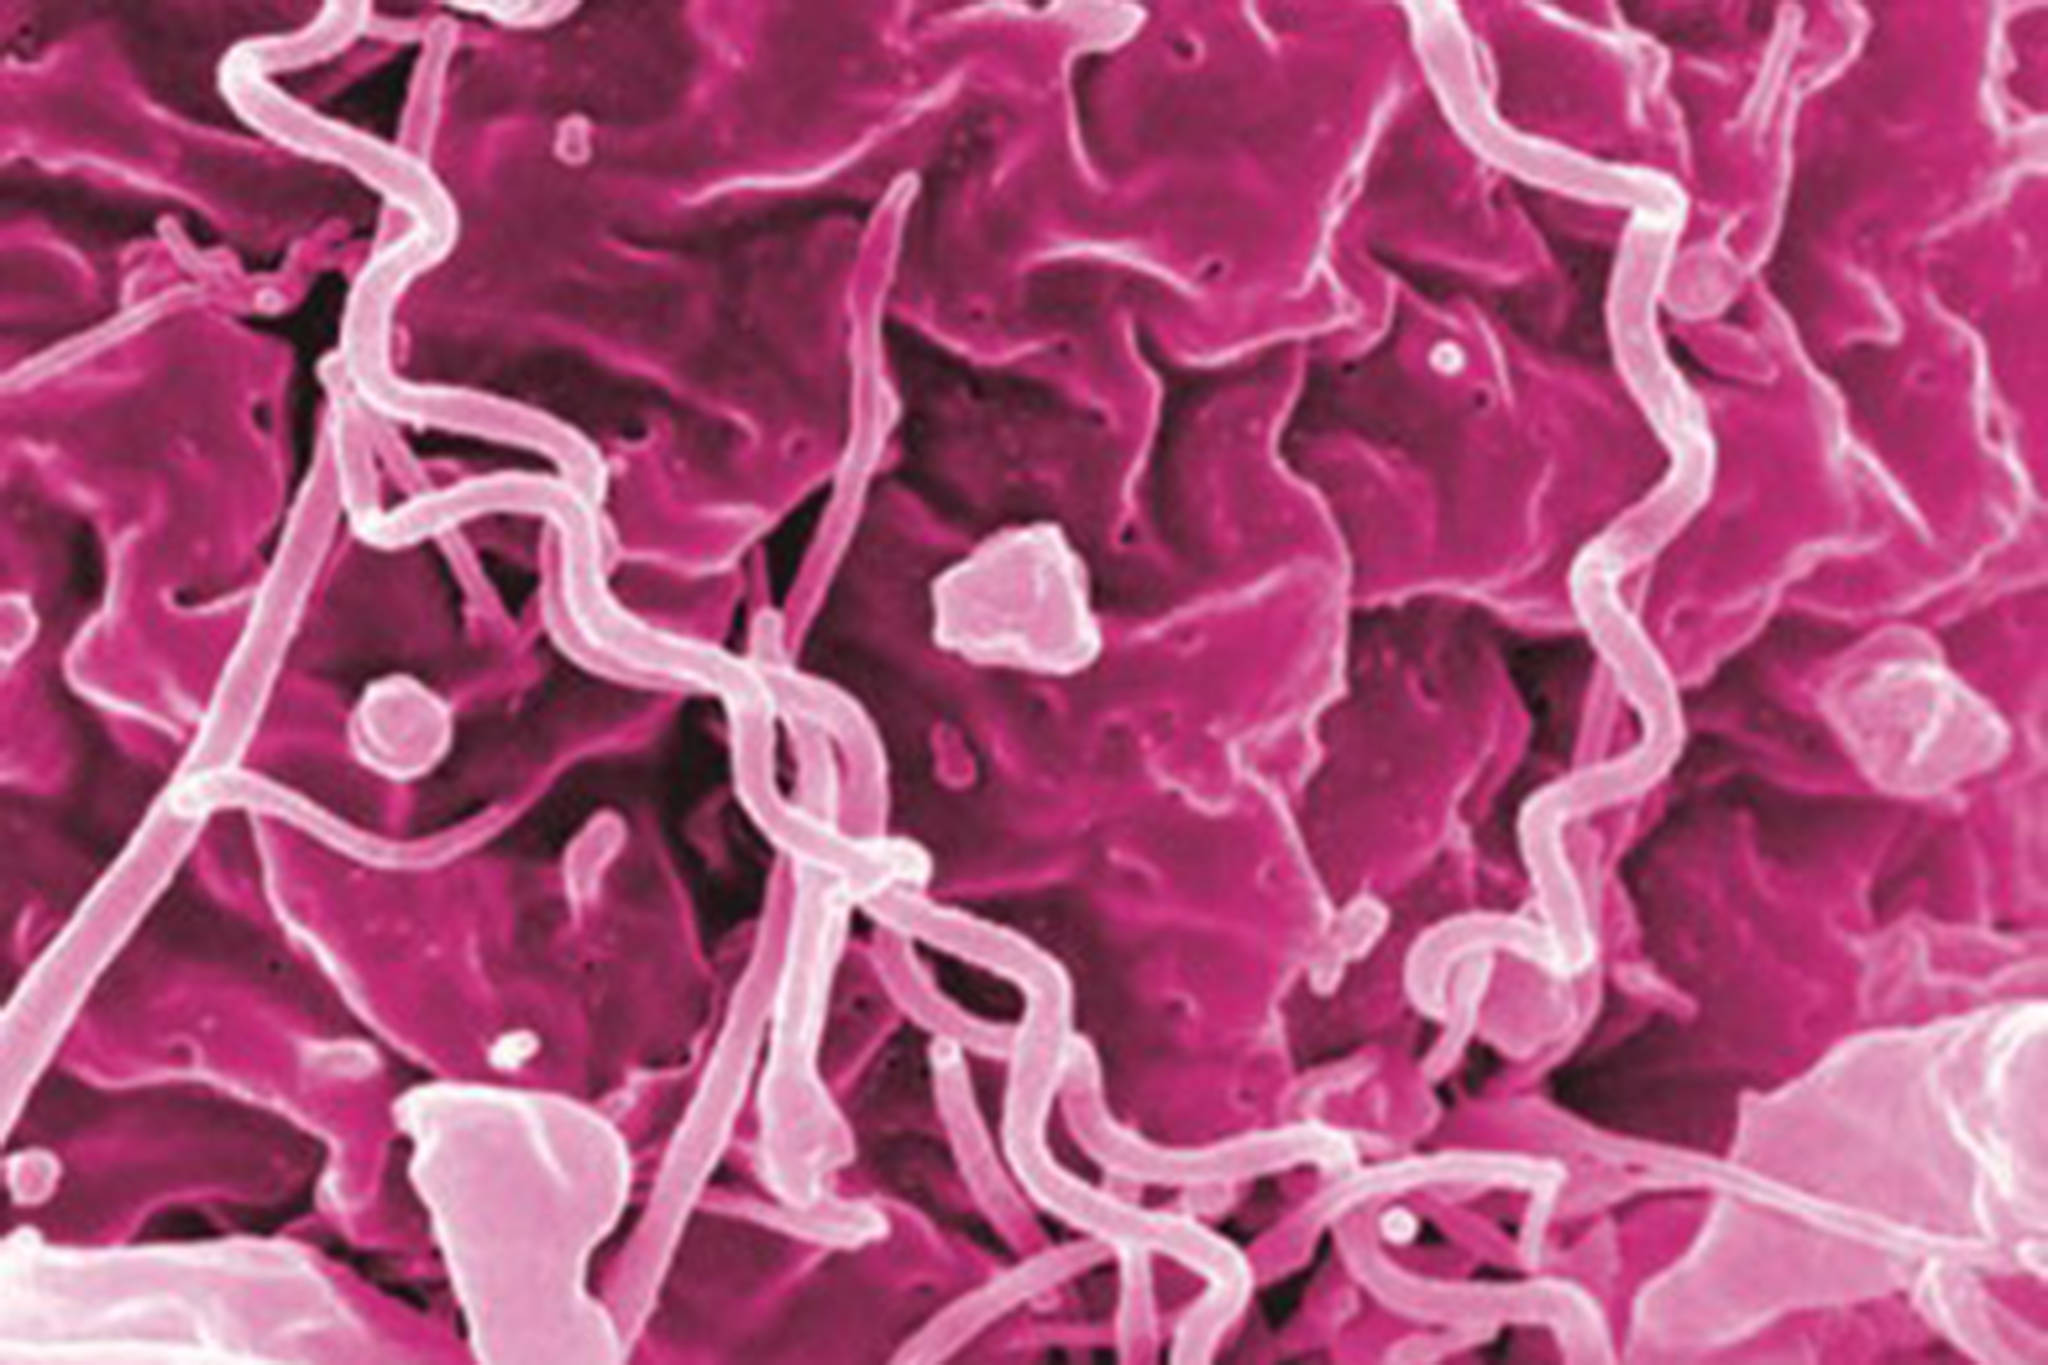 This image shows treponema pallidum, the bacteria that cause syphilis. Alaska's syphilis infection rates increased by 49% over 2019 numbers, the Department of Health and Social Services reported this week. (Courtesy Photo / NIAID)